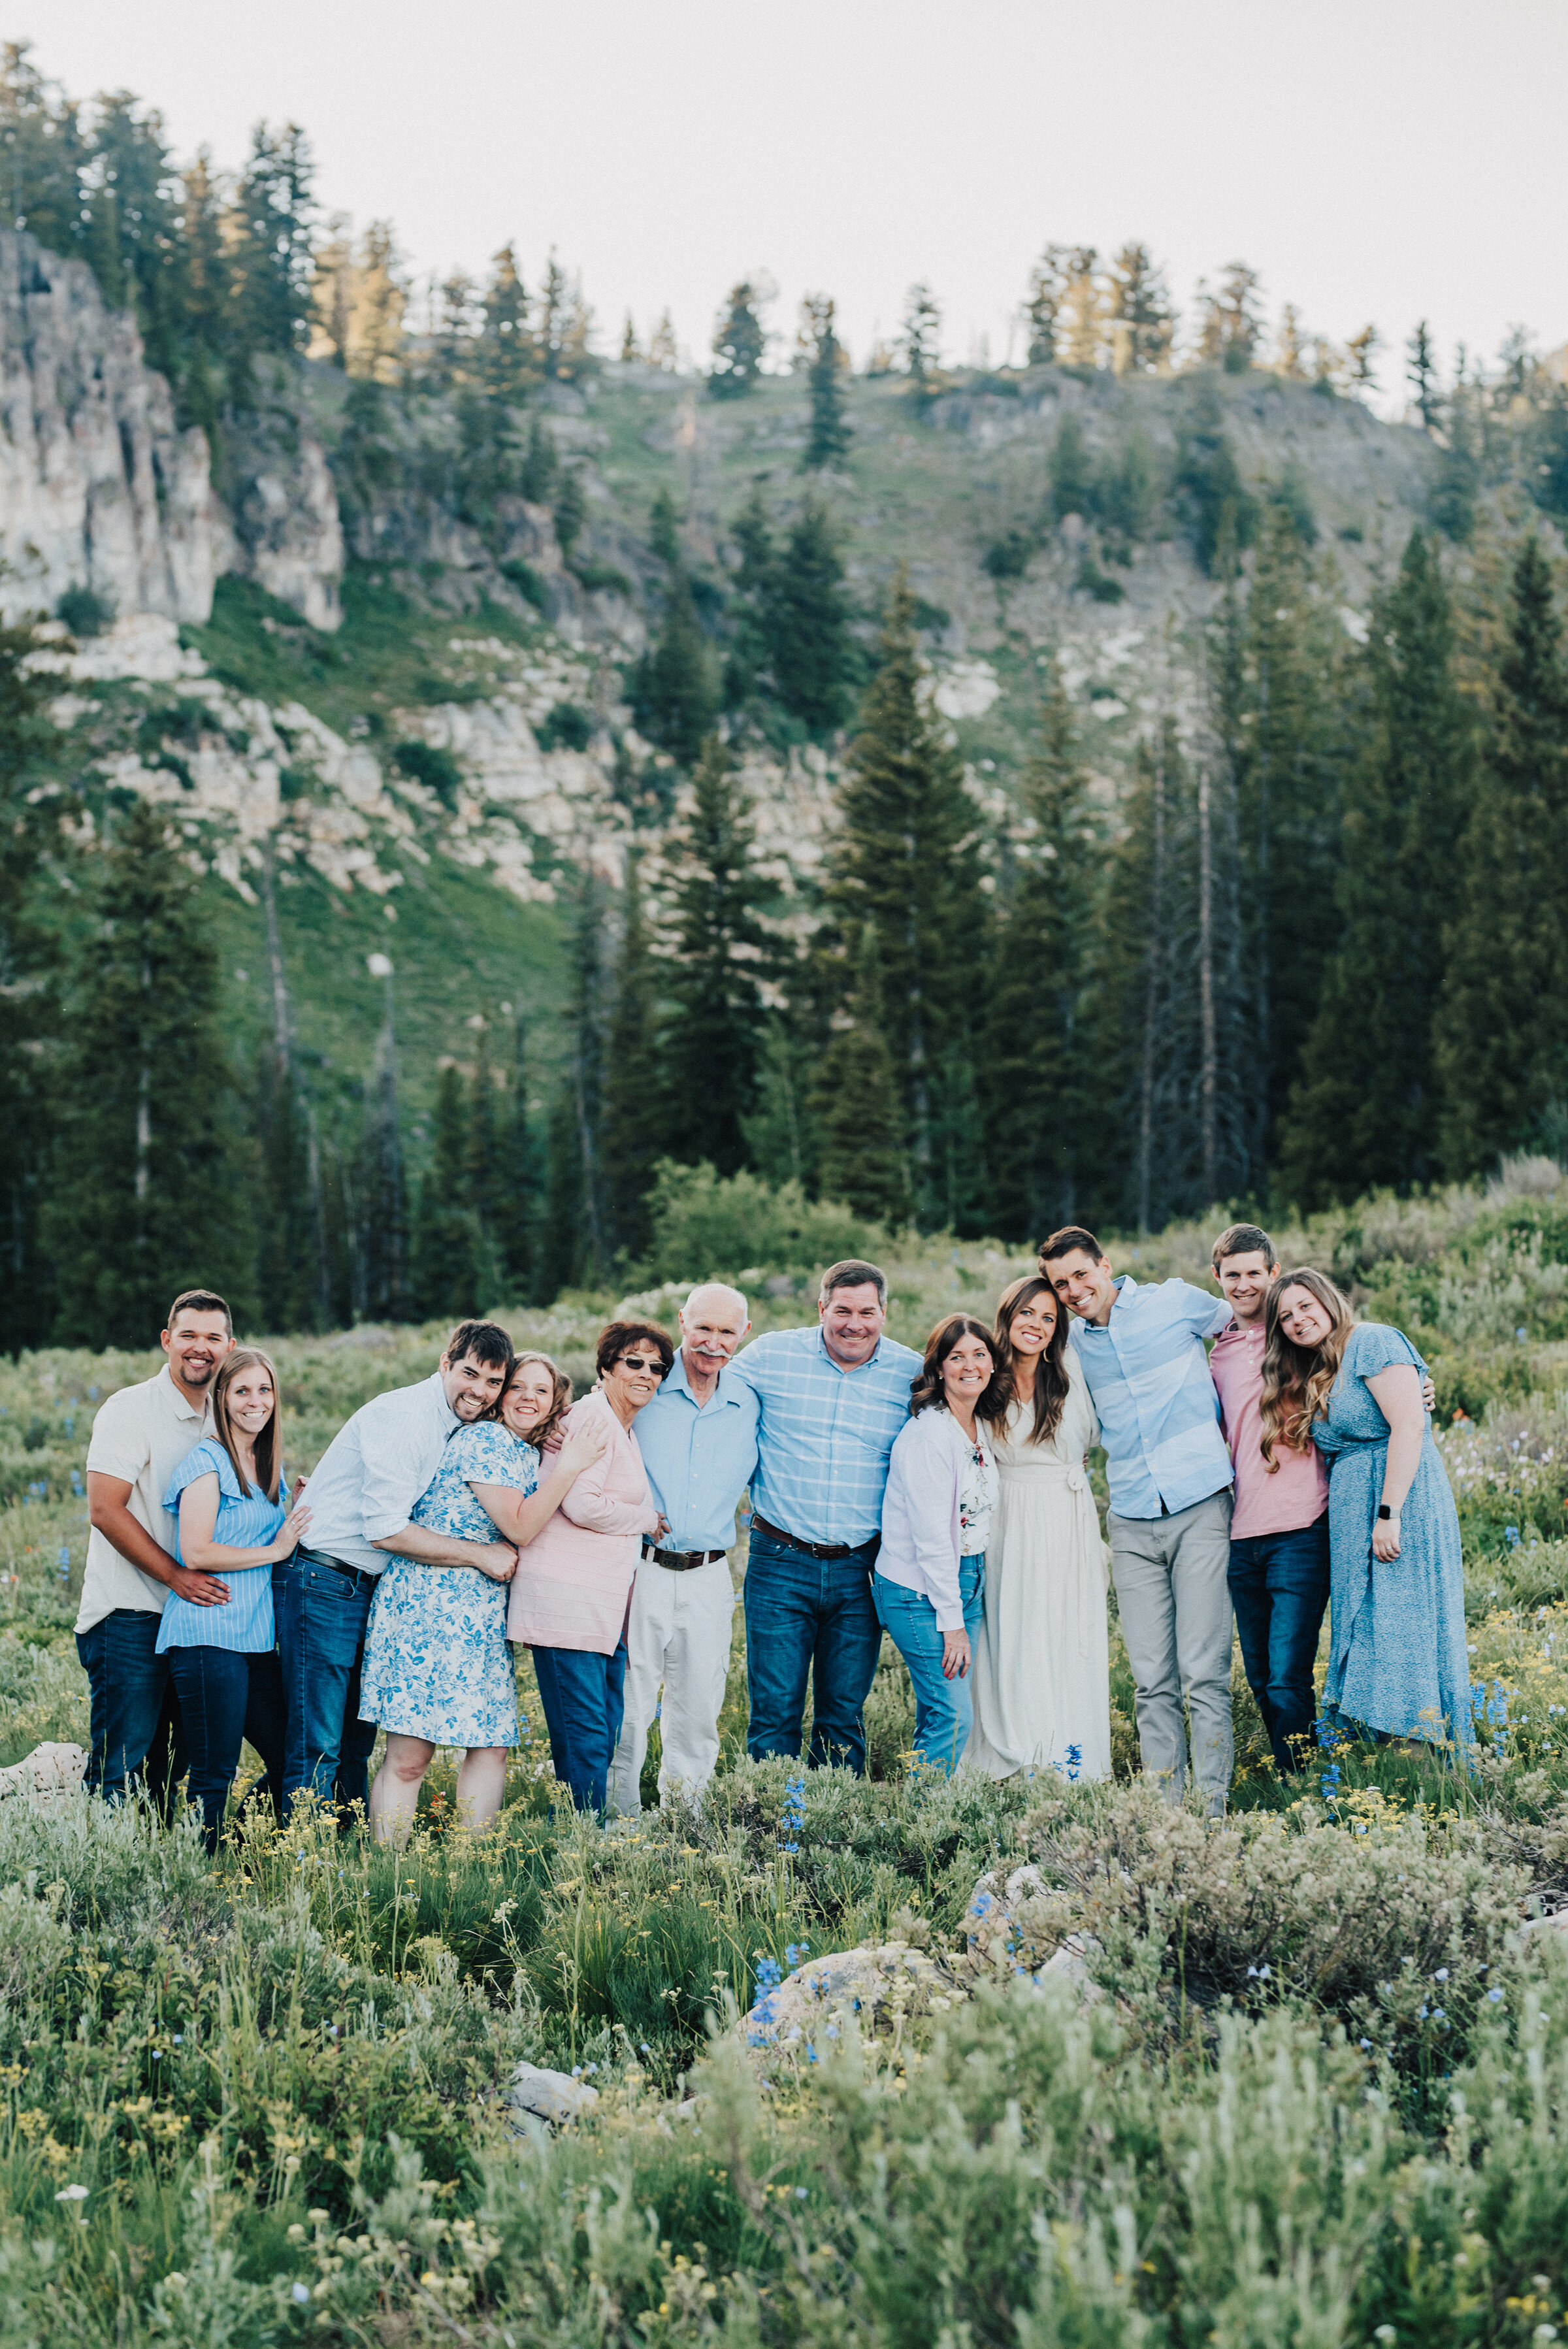  Delightful family photo session surrounded by pine trees and wild flowers up Logan canyon at Tony Grove. Logan Utah family photographer Kristi Alyse photography Tony Grove forest nature photos Logan canyon light blue family photos wild flowers grand parents children parents spouses reunited dreamy scenic photo shoot #kristialysephotography #utahphotographer #familyphotography #logancanyon #familyphotos #forest #wildflowers #northernutah #familyportraits #family 